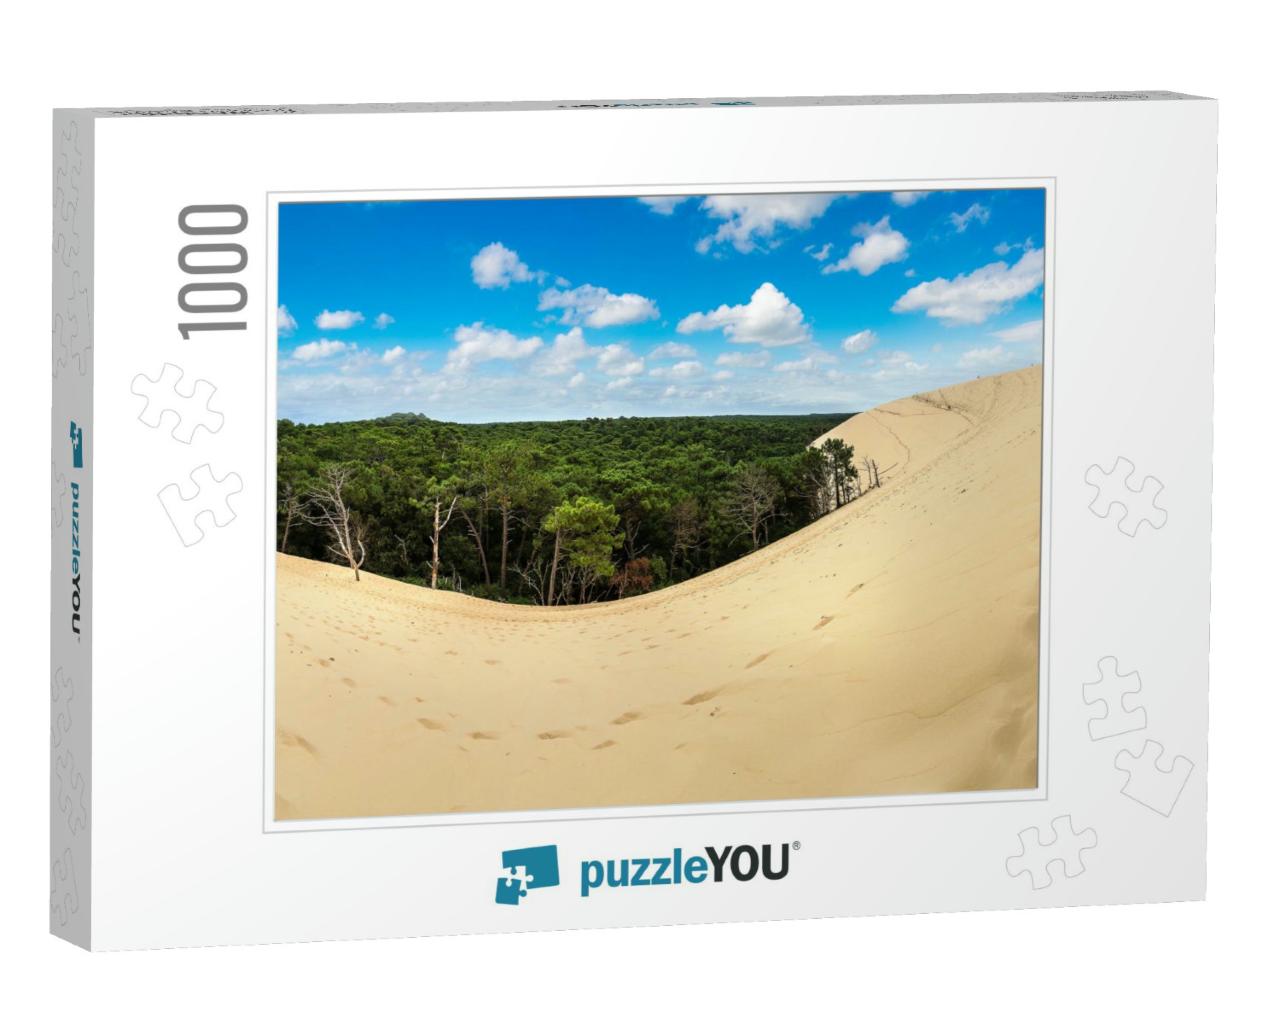 Dune of Pilat Dune Du Pyla - the Tallest Sand Dune in Eur... Jigsaw Puzzle with 1000 pieces